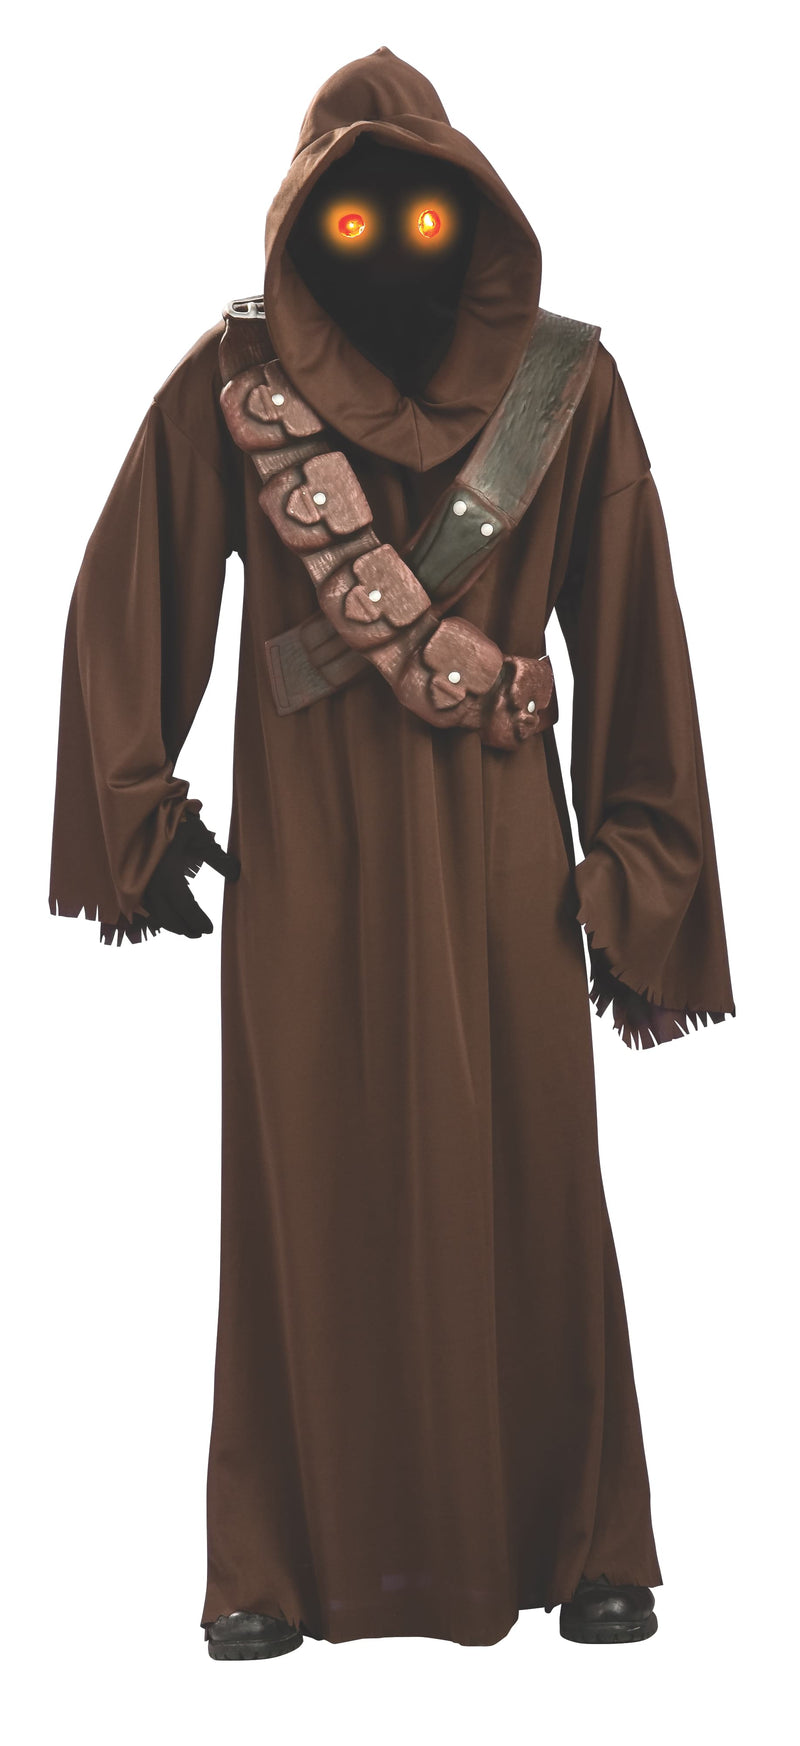 Jawa Star Wars Deluxe Costume Adult